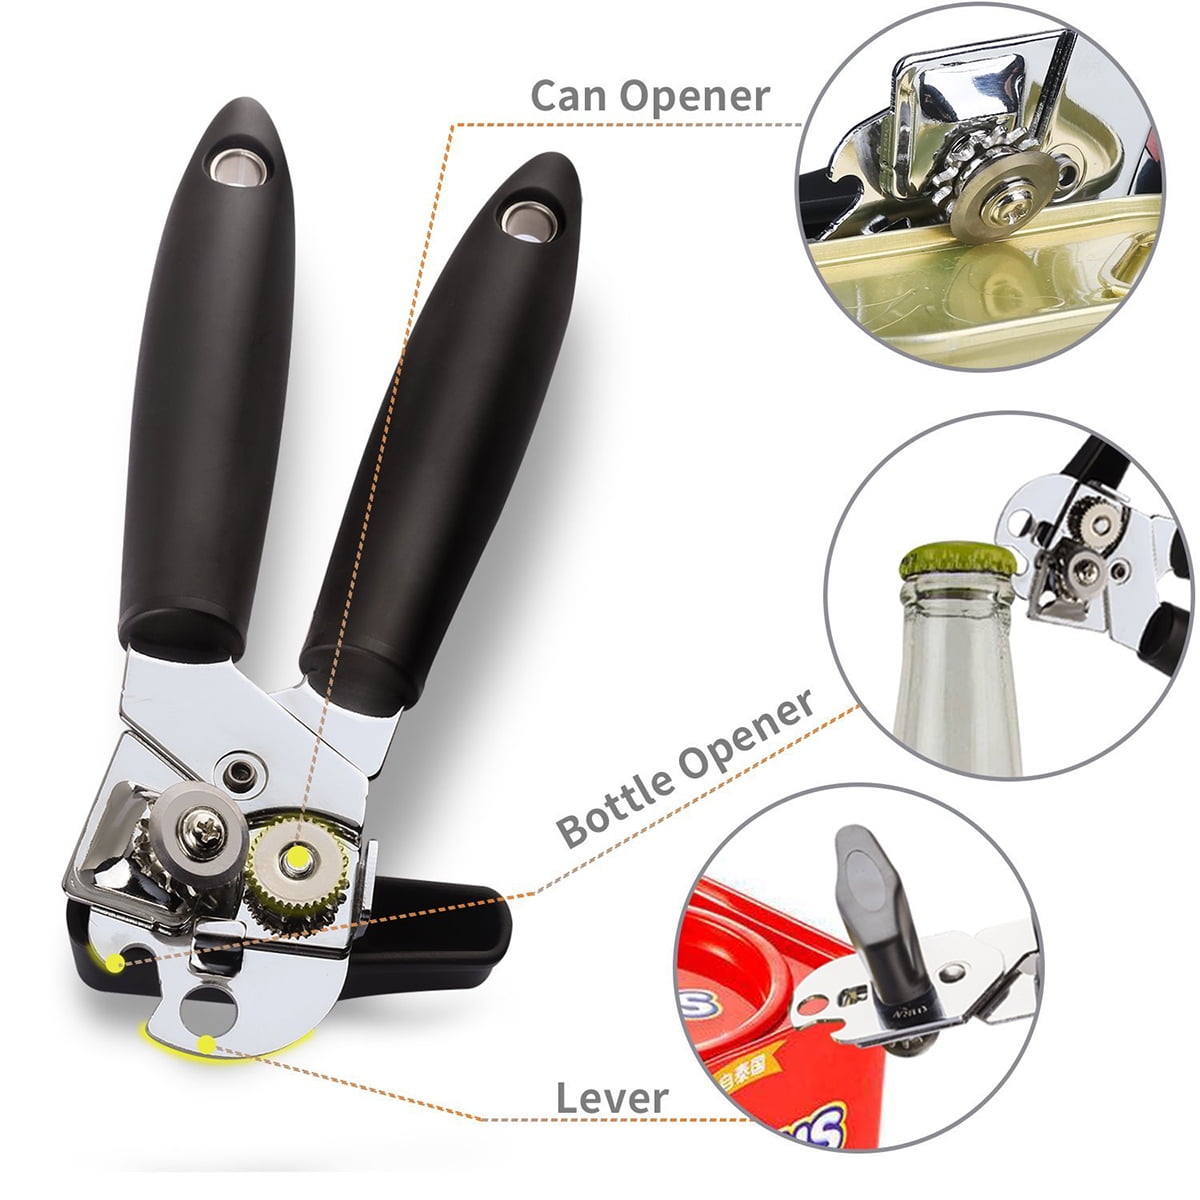 Black and Silver Leifheit Stainless Steel Safety Pro Single Handle Can Opener